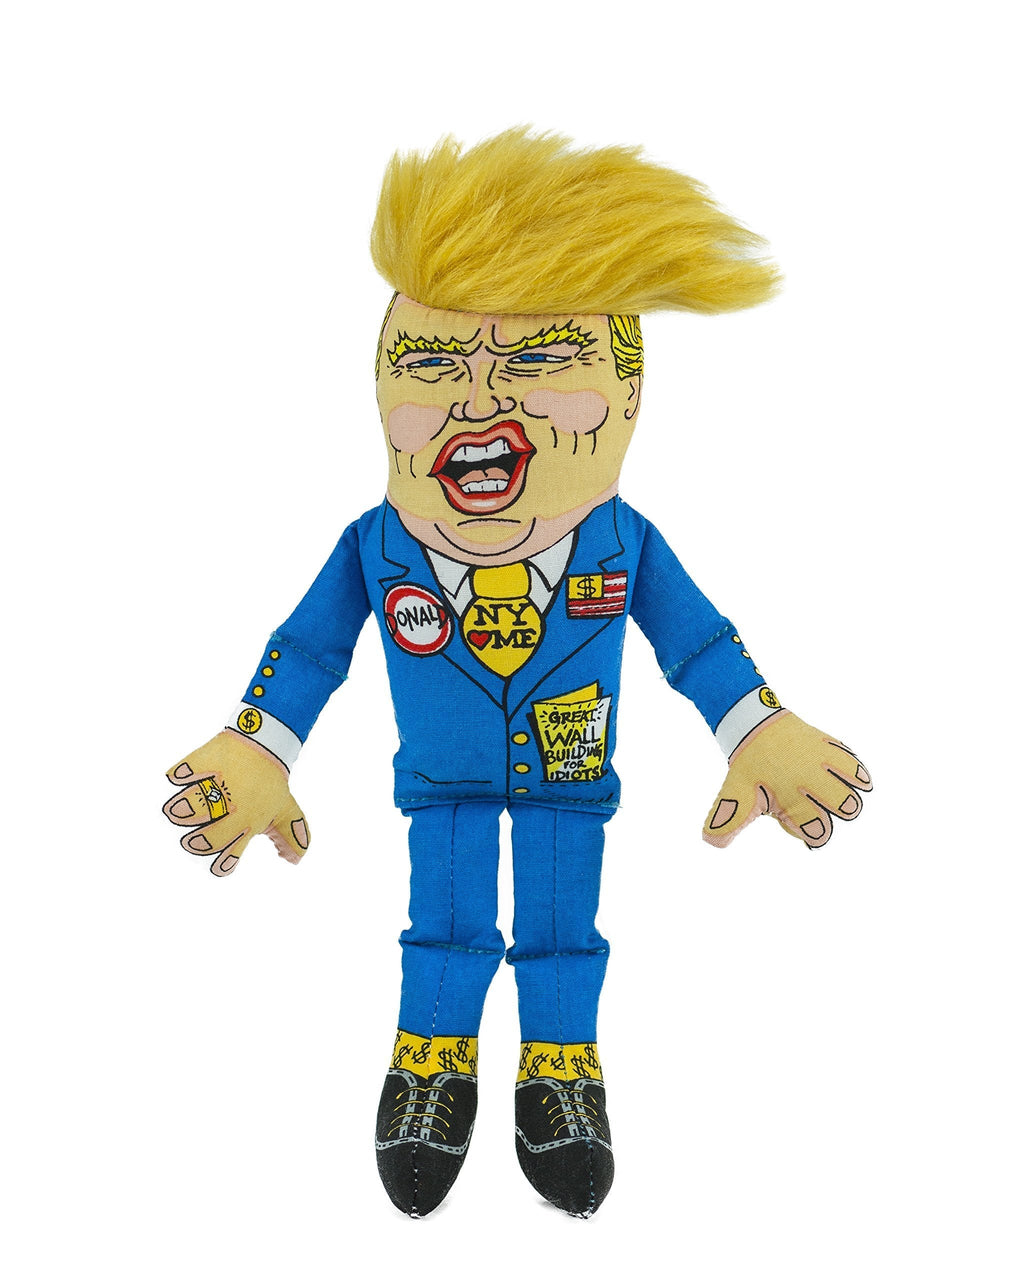 [Australia] - FUZZU Donald Trump Special Edition Political Parody Novelty Small (8") Cat Toy - Durable & Non-Toxic with U.S. Grown Certified Organic Catnip 